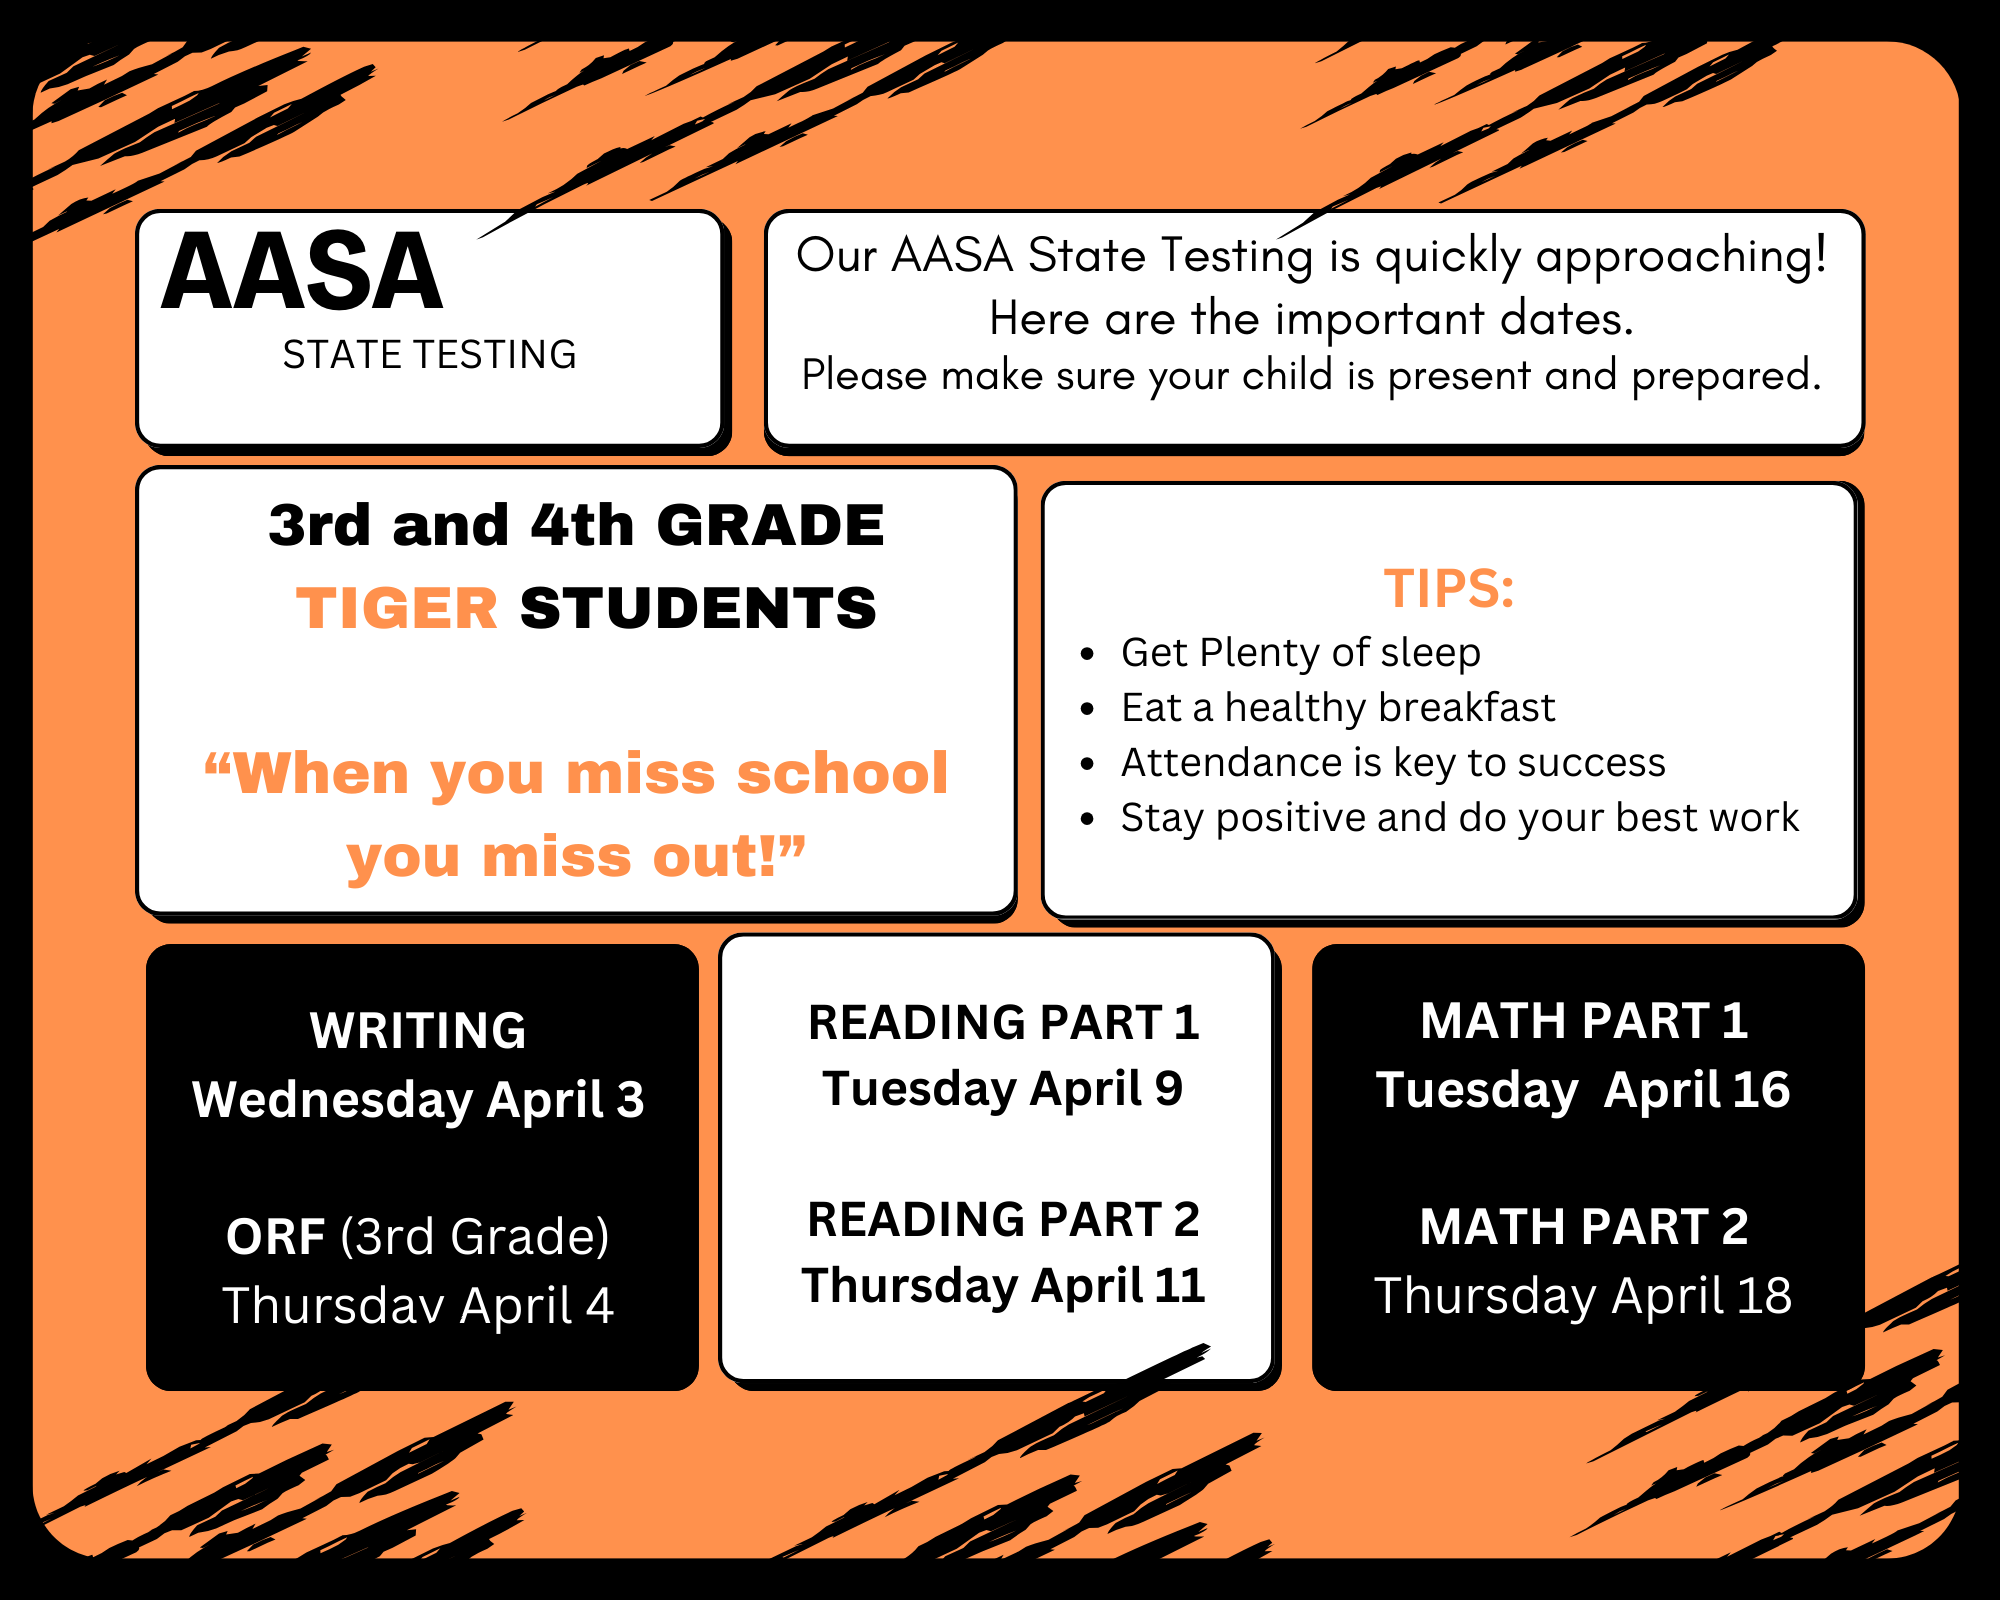 AASA State Testing flyer